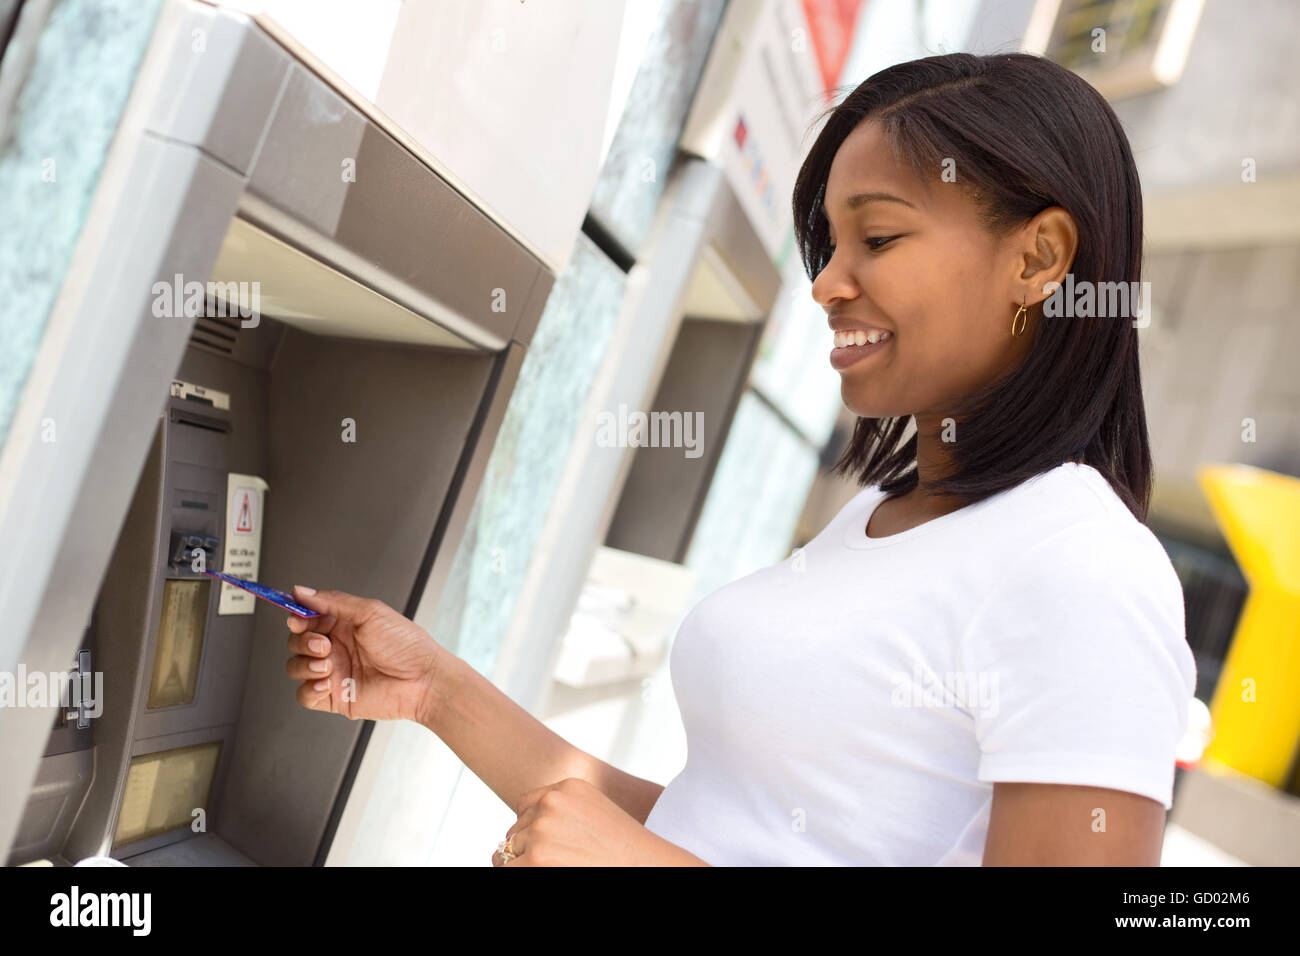 young woman at the cash machine withdrawing money Stock Photo